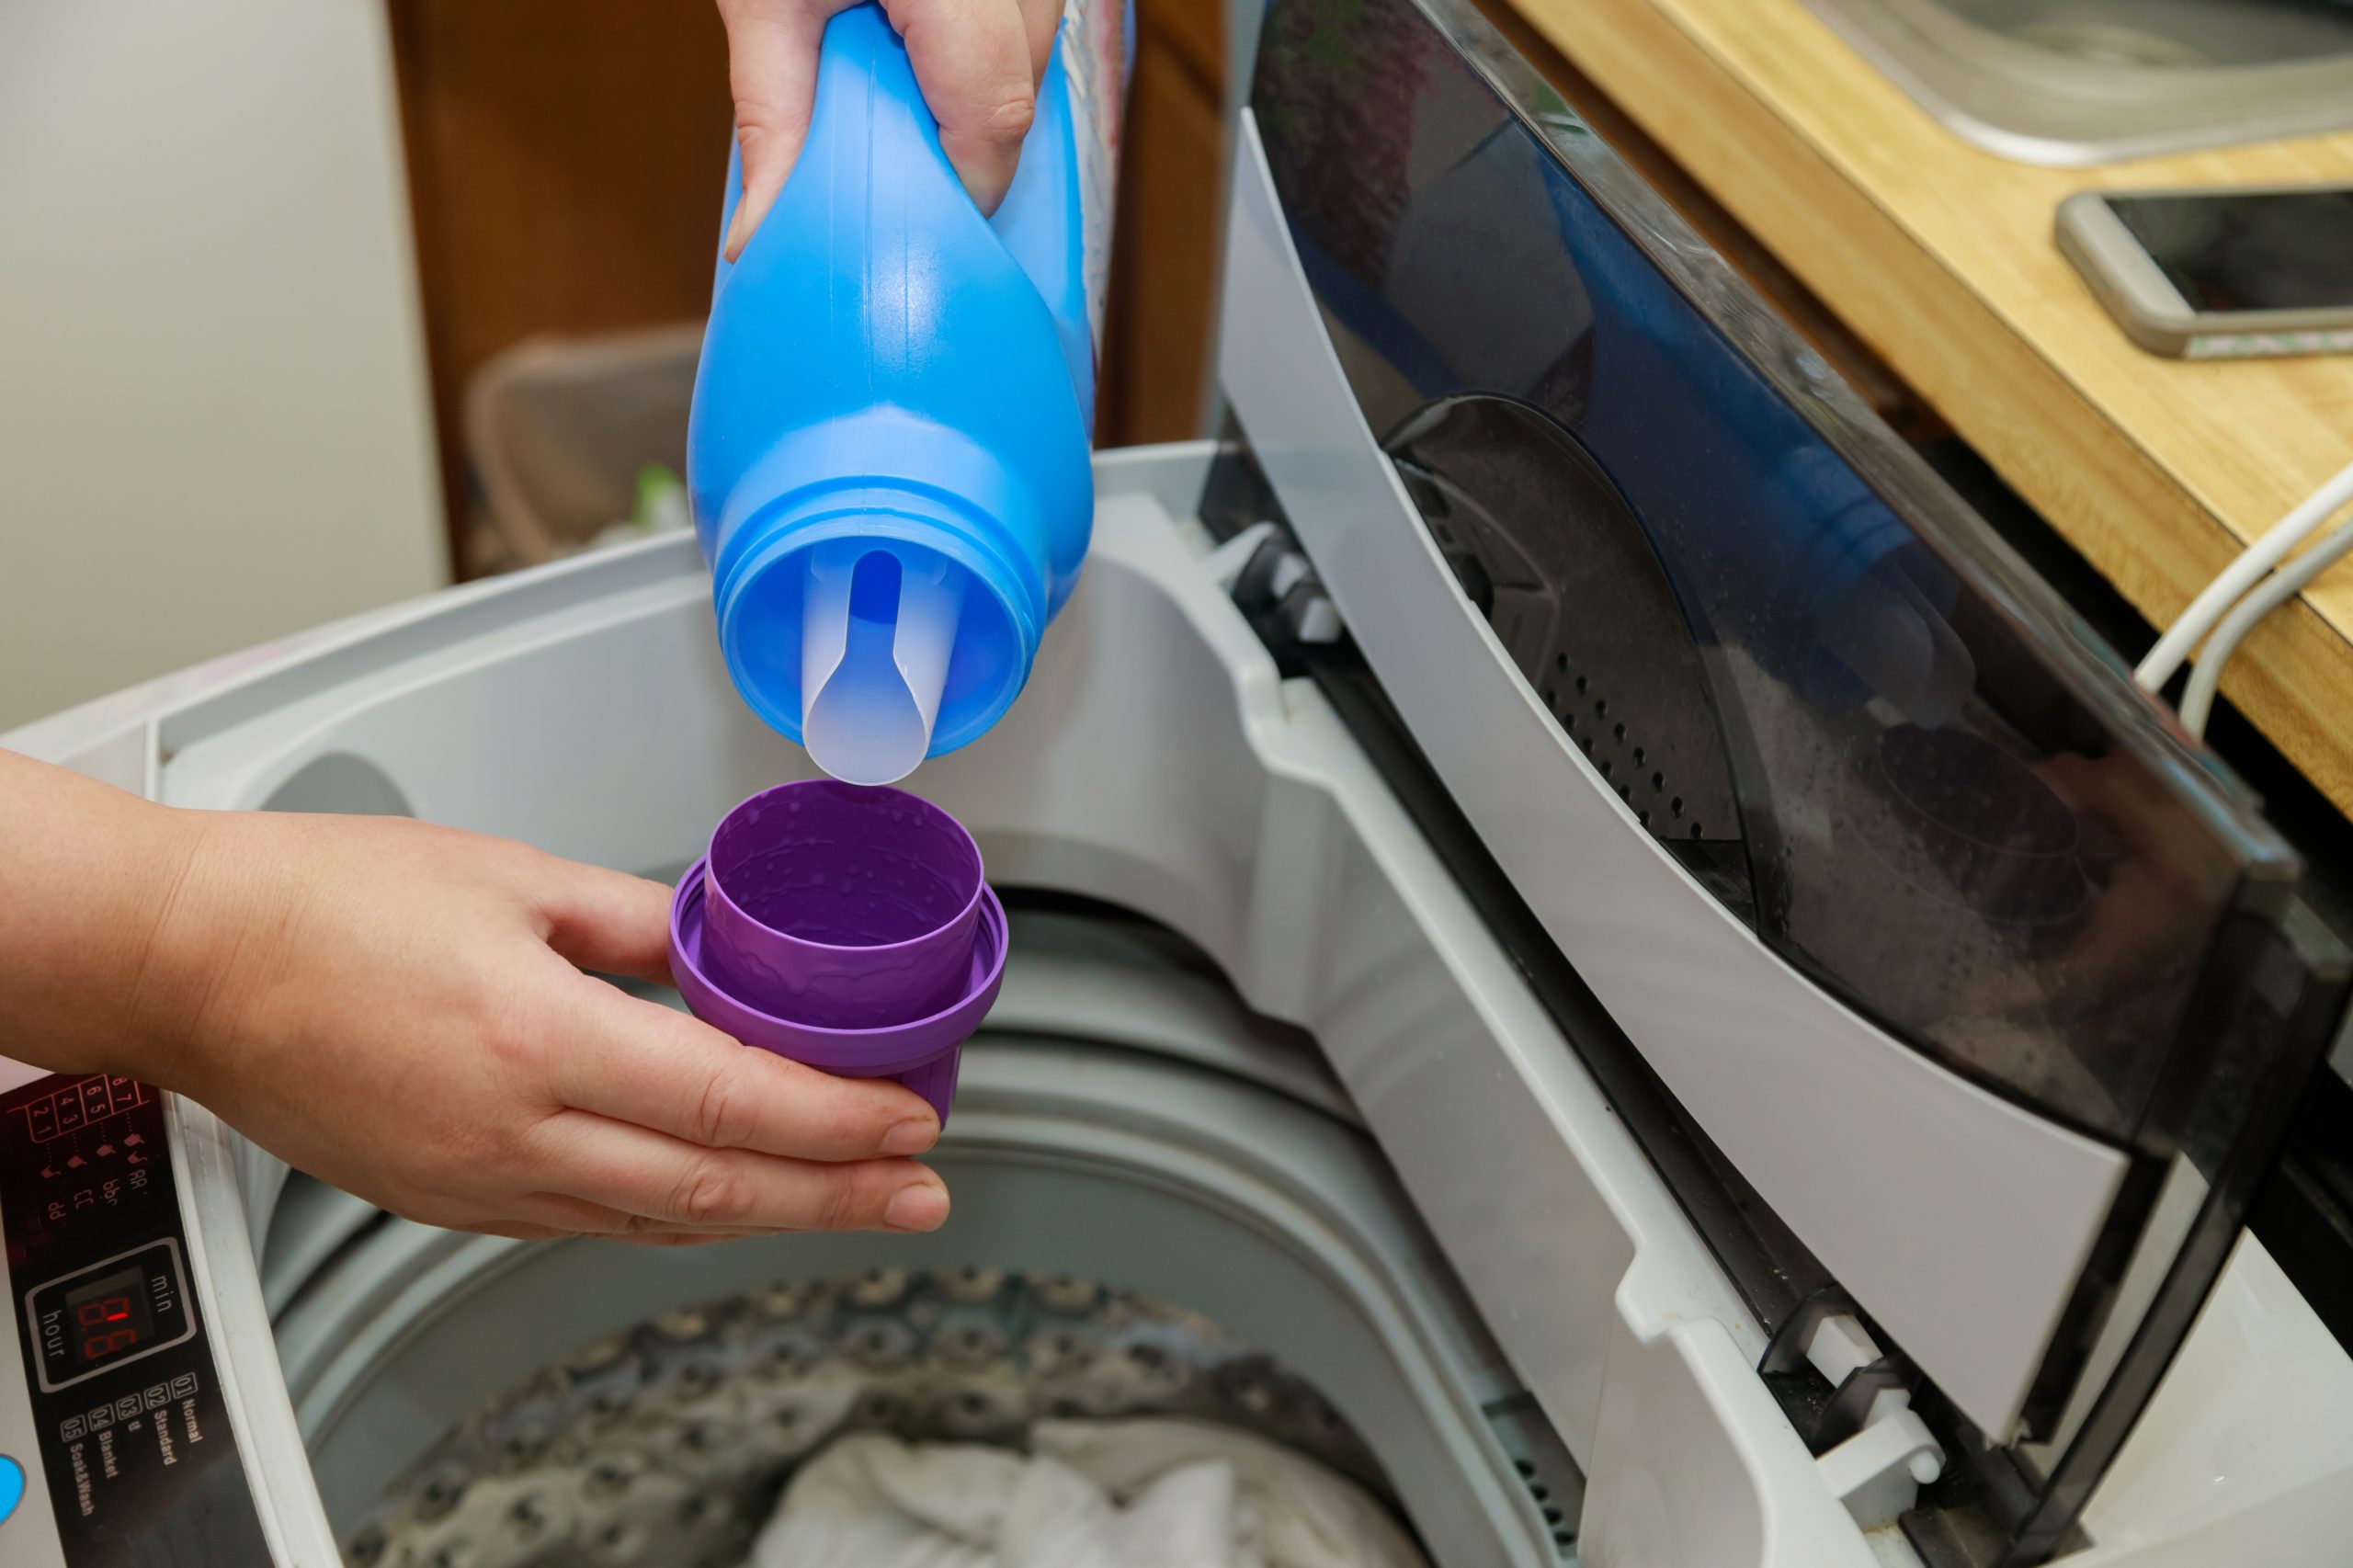 person adding laundry detergent to their washing machine and laundry